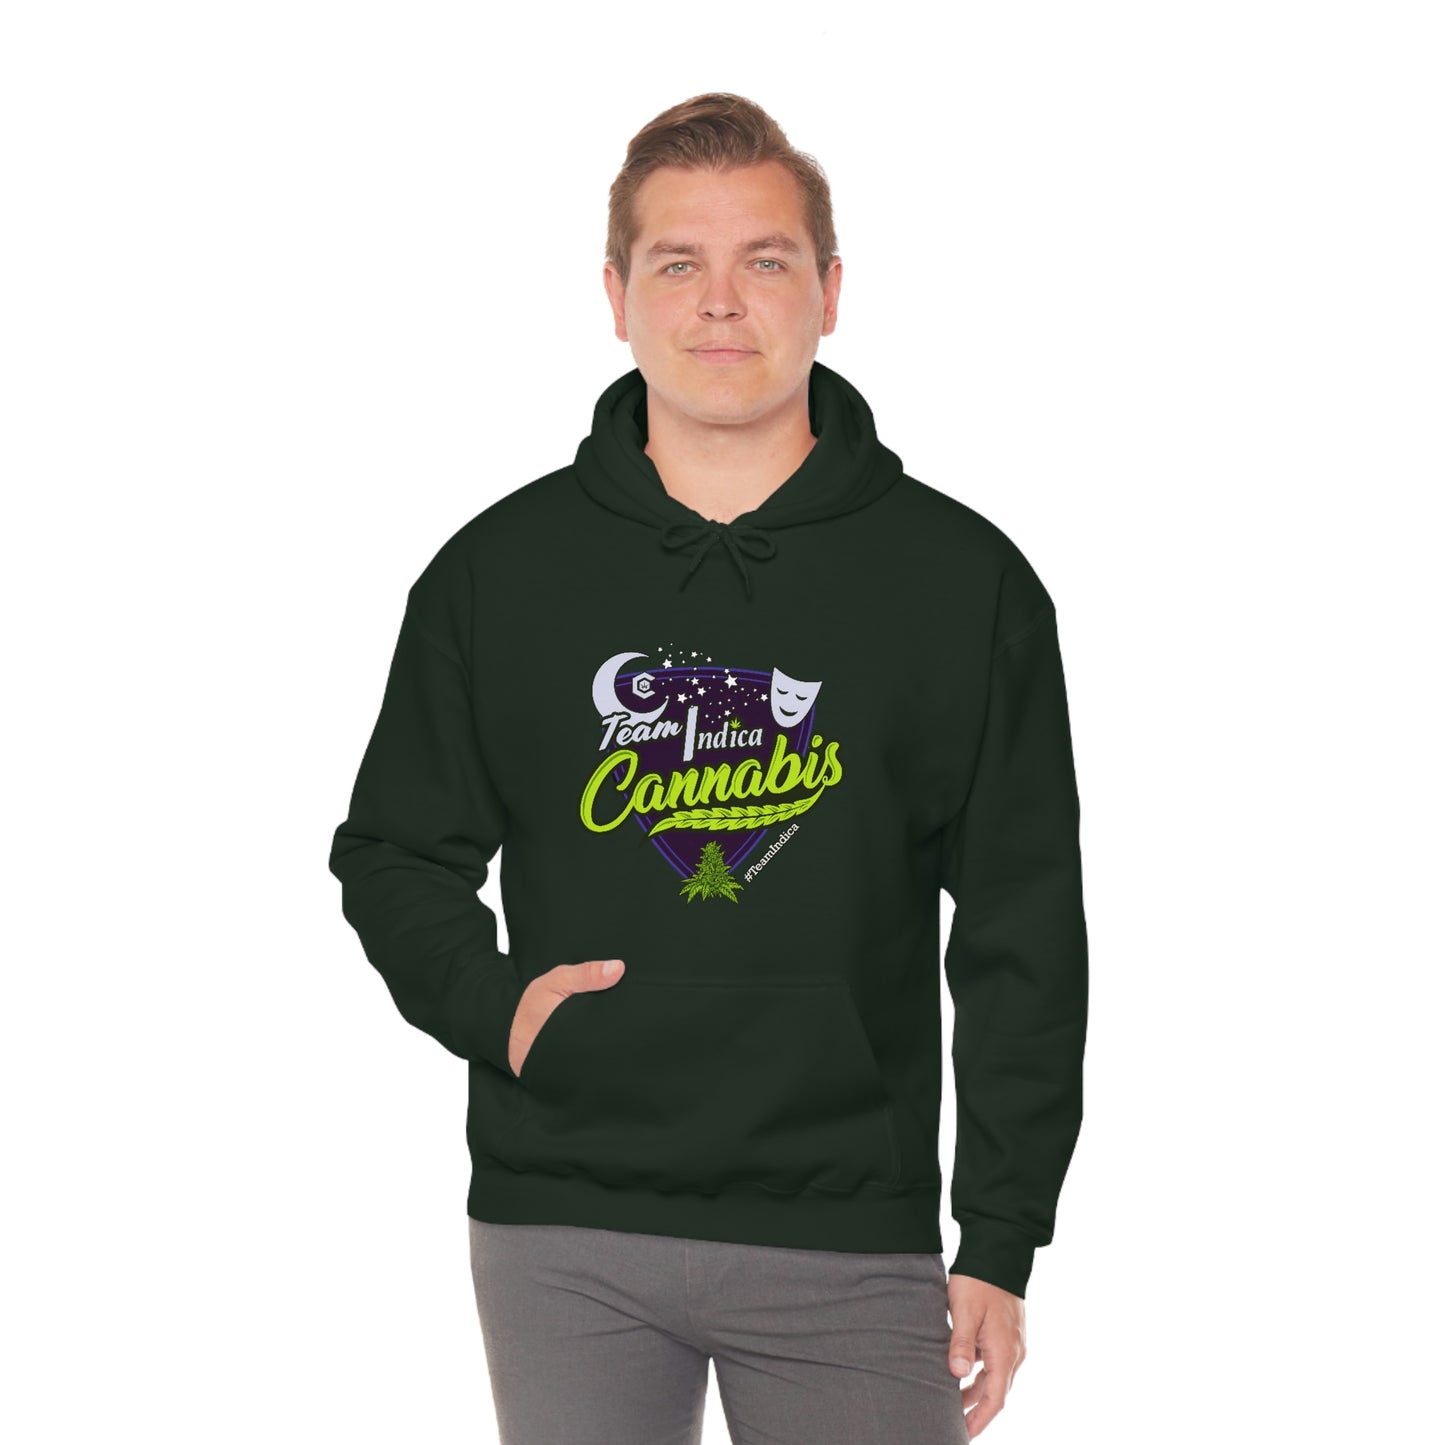 A man wearing a green hoodie with the words "Team Indica Cannabis Pullover" on it.